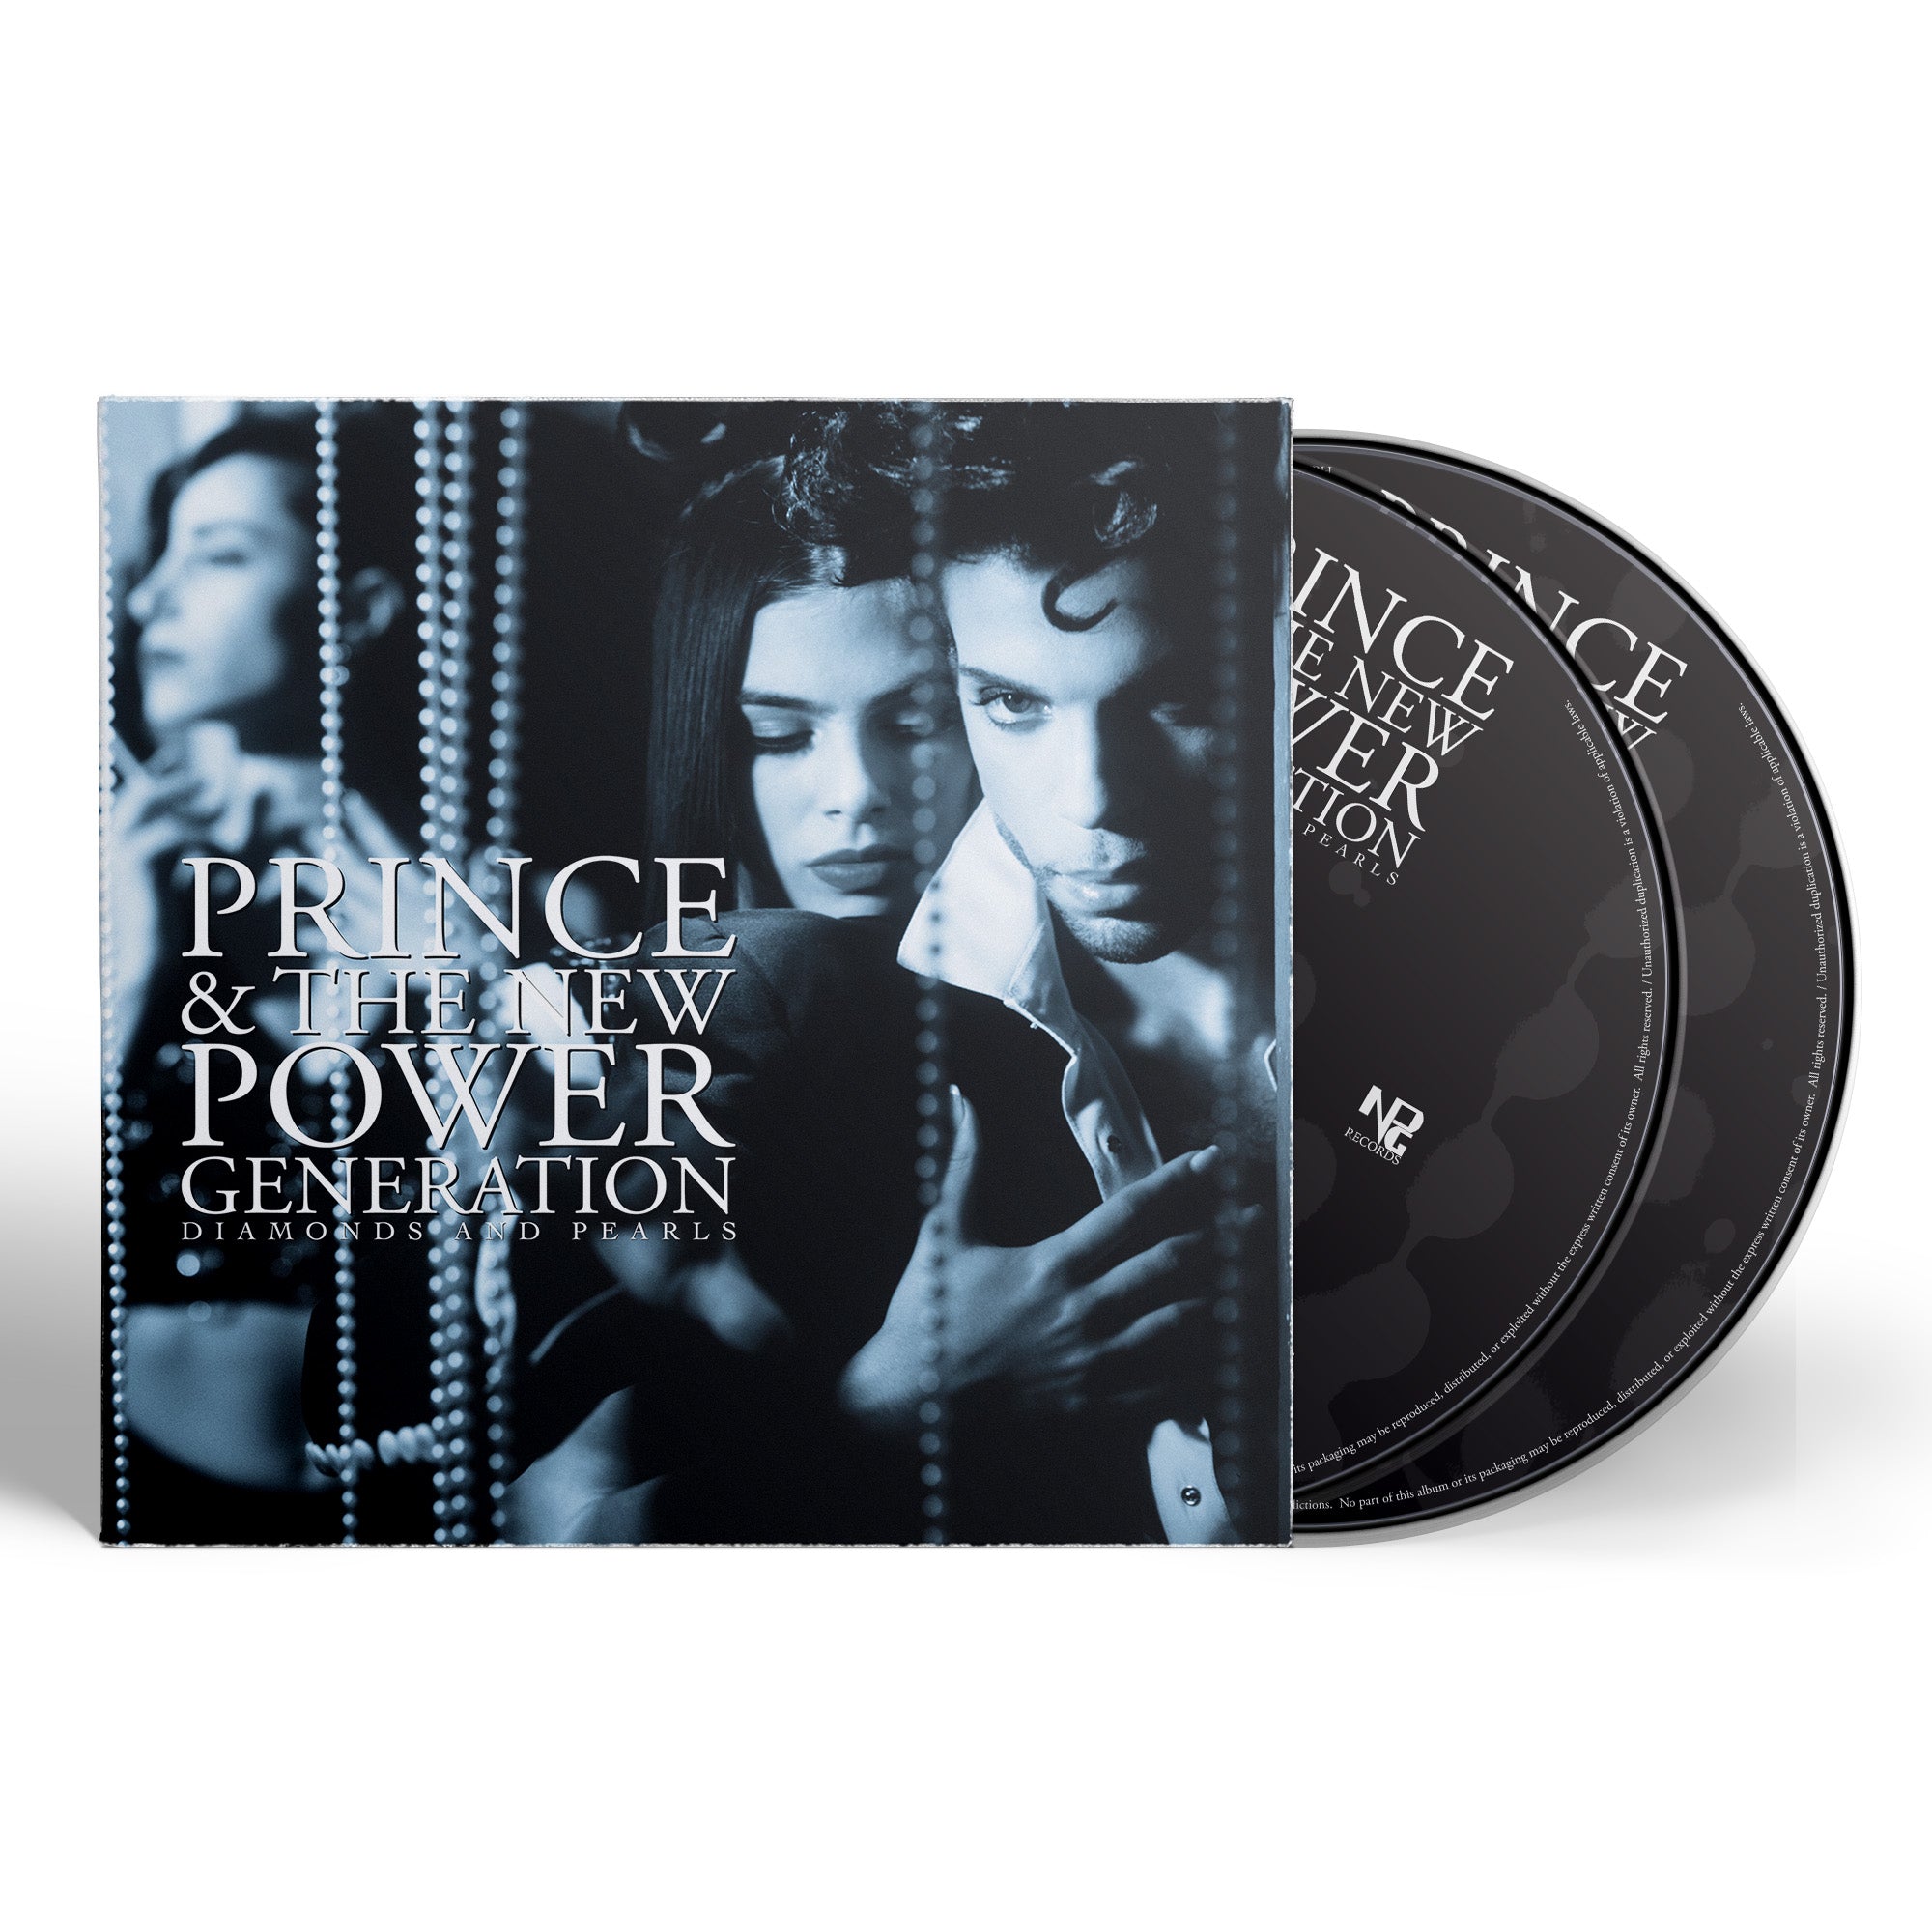 Prince & The New Power Generation | Diamonds and Pearls Deluxe Edition | CD